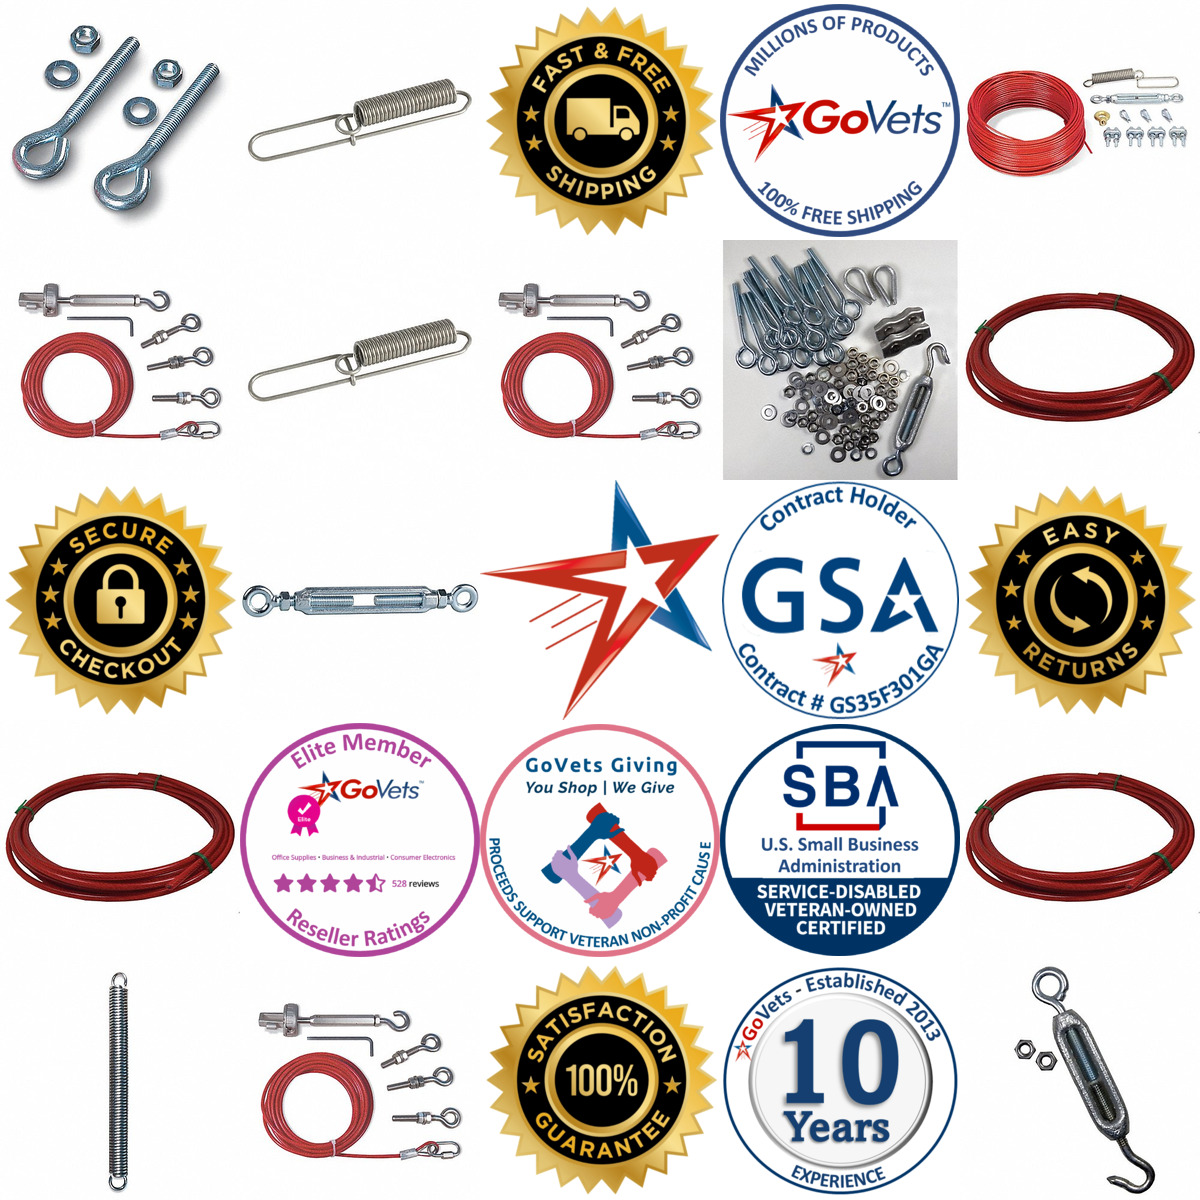 A selection of Cable Pull Switch Accessories products on GoVets